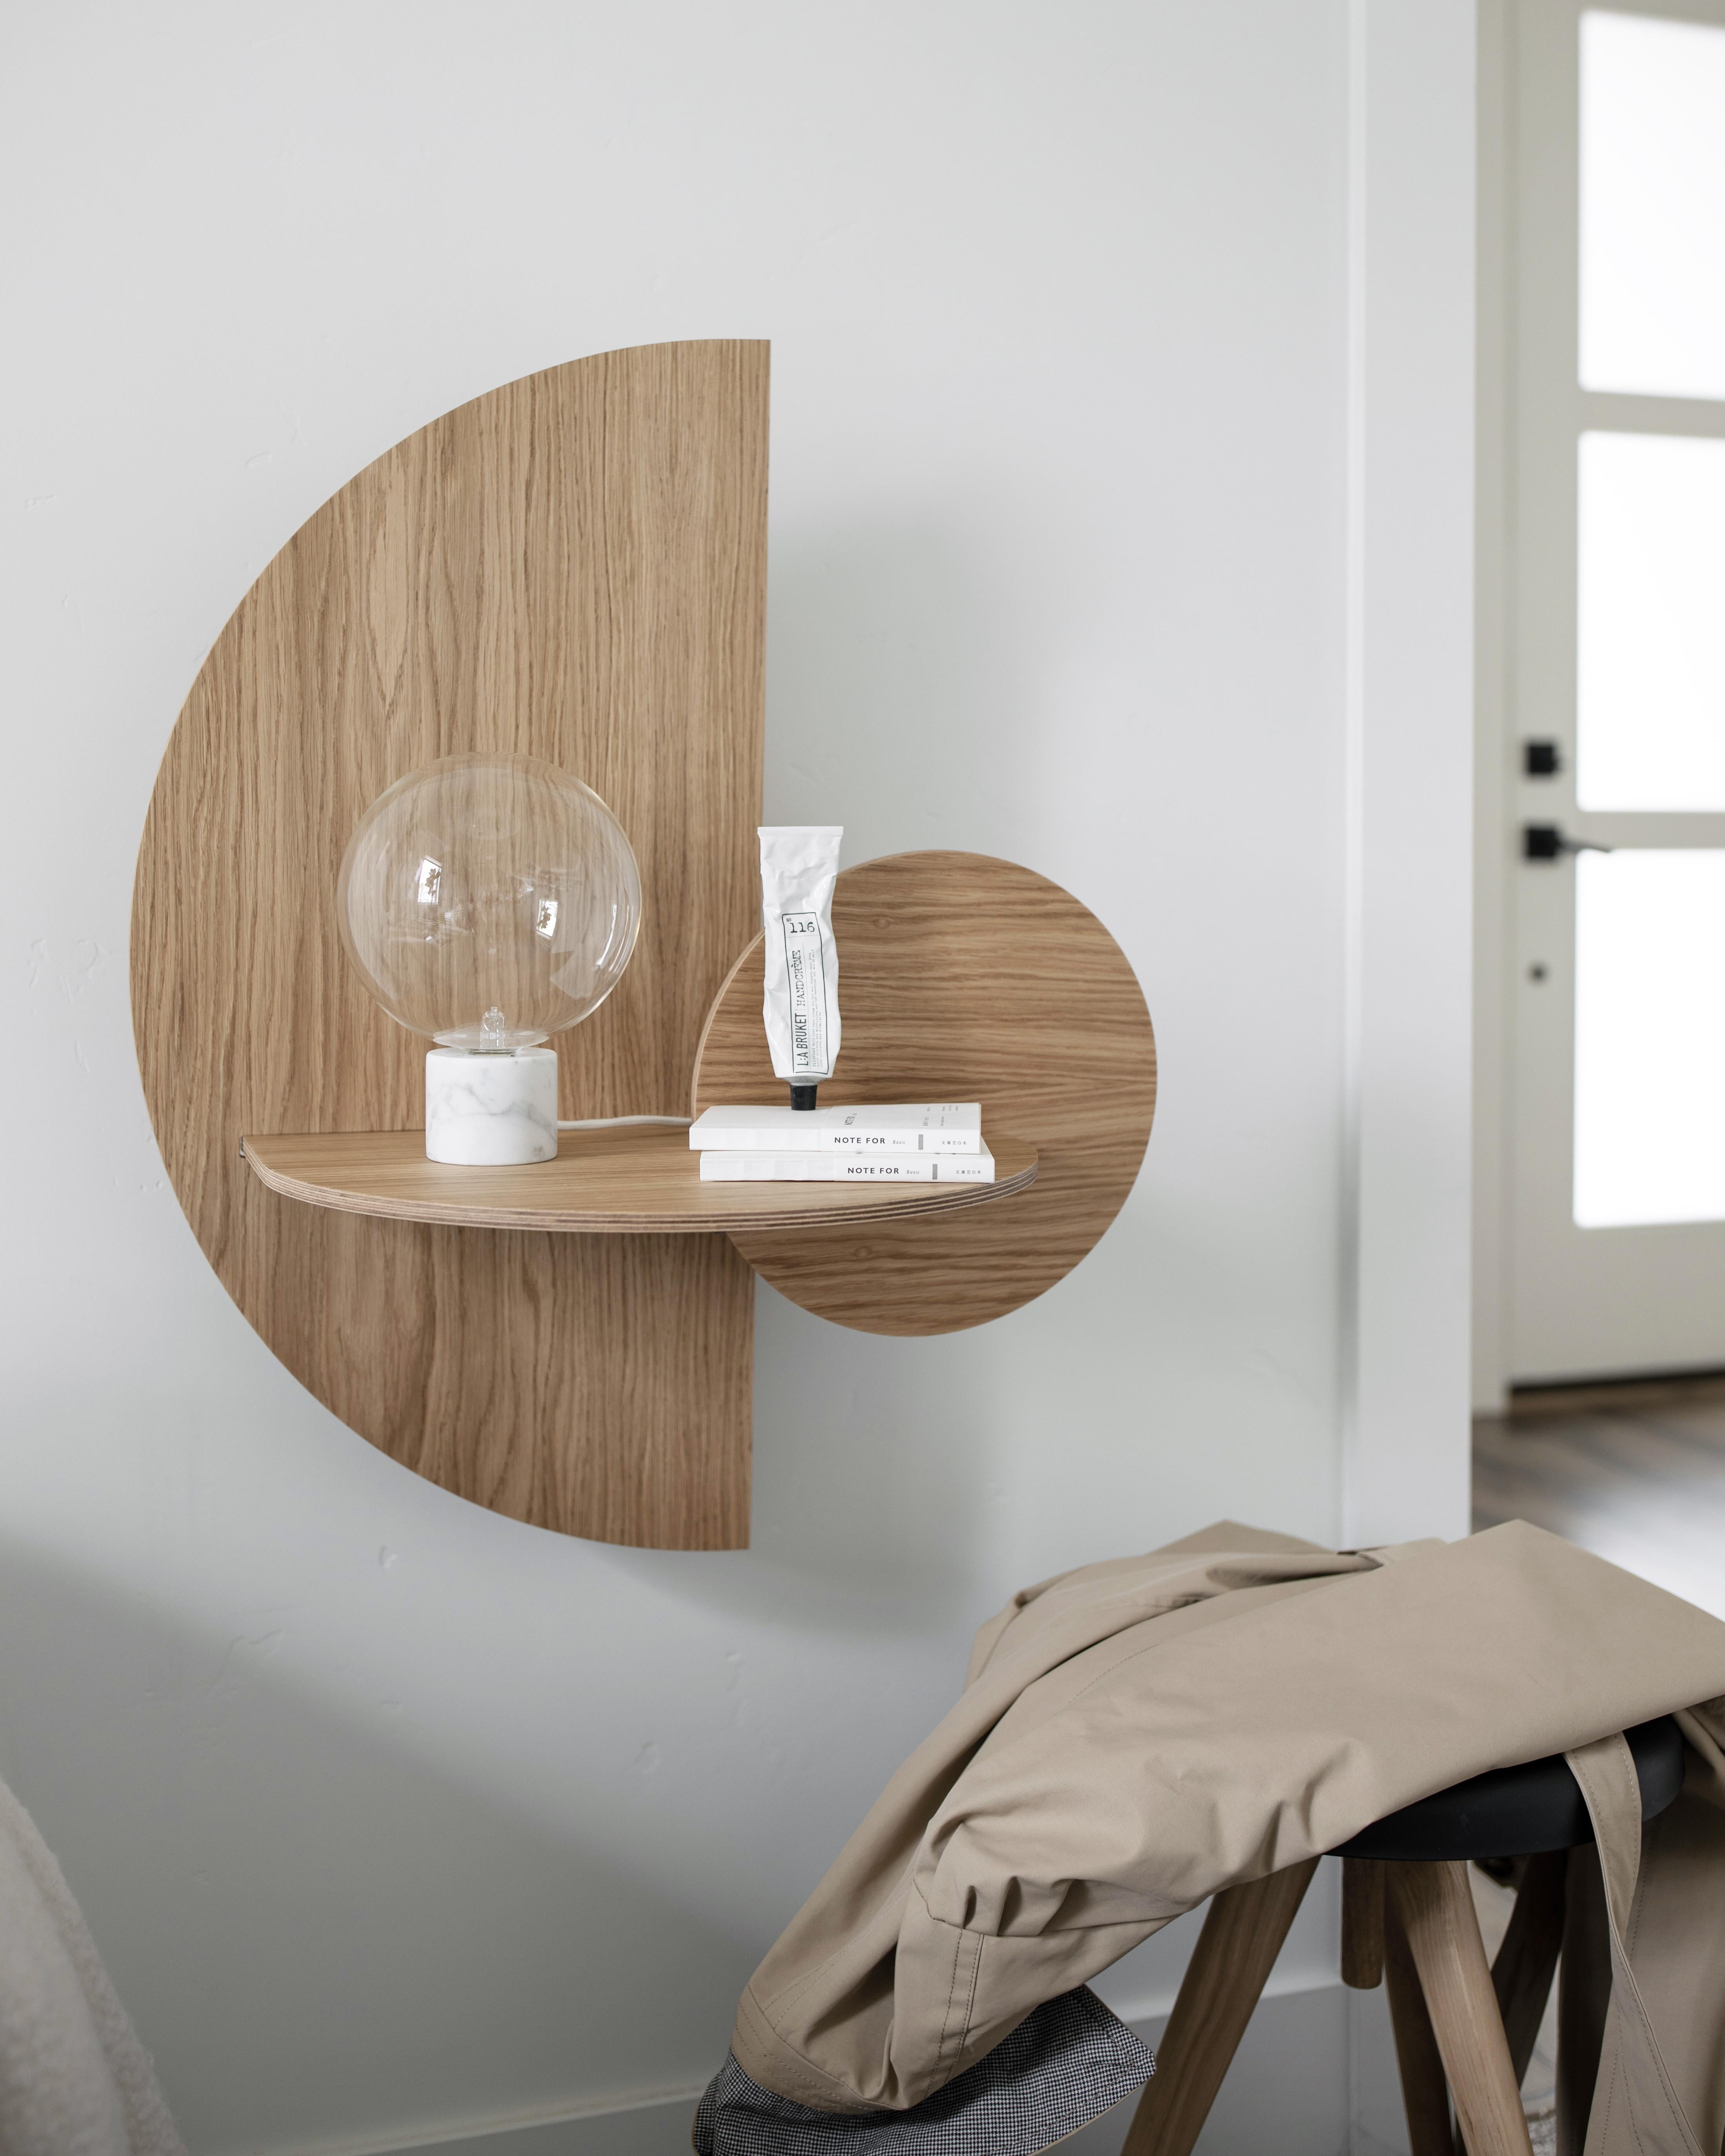 Alba is a versatile product that can be used as a wall shelf with hidden storage and as a bedside table with concealed storage. Alba means “sunrise” in Spanish, hence its name, since the two front pieces of the product simulate the sun and the moon